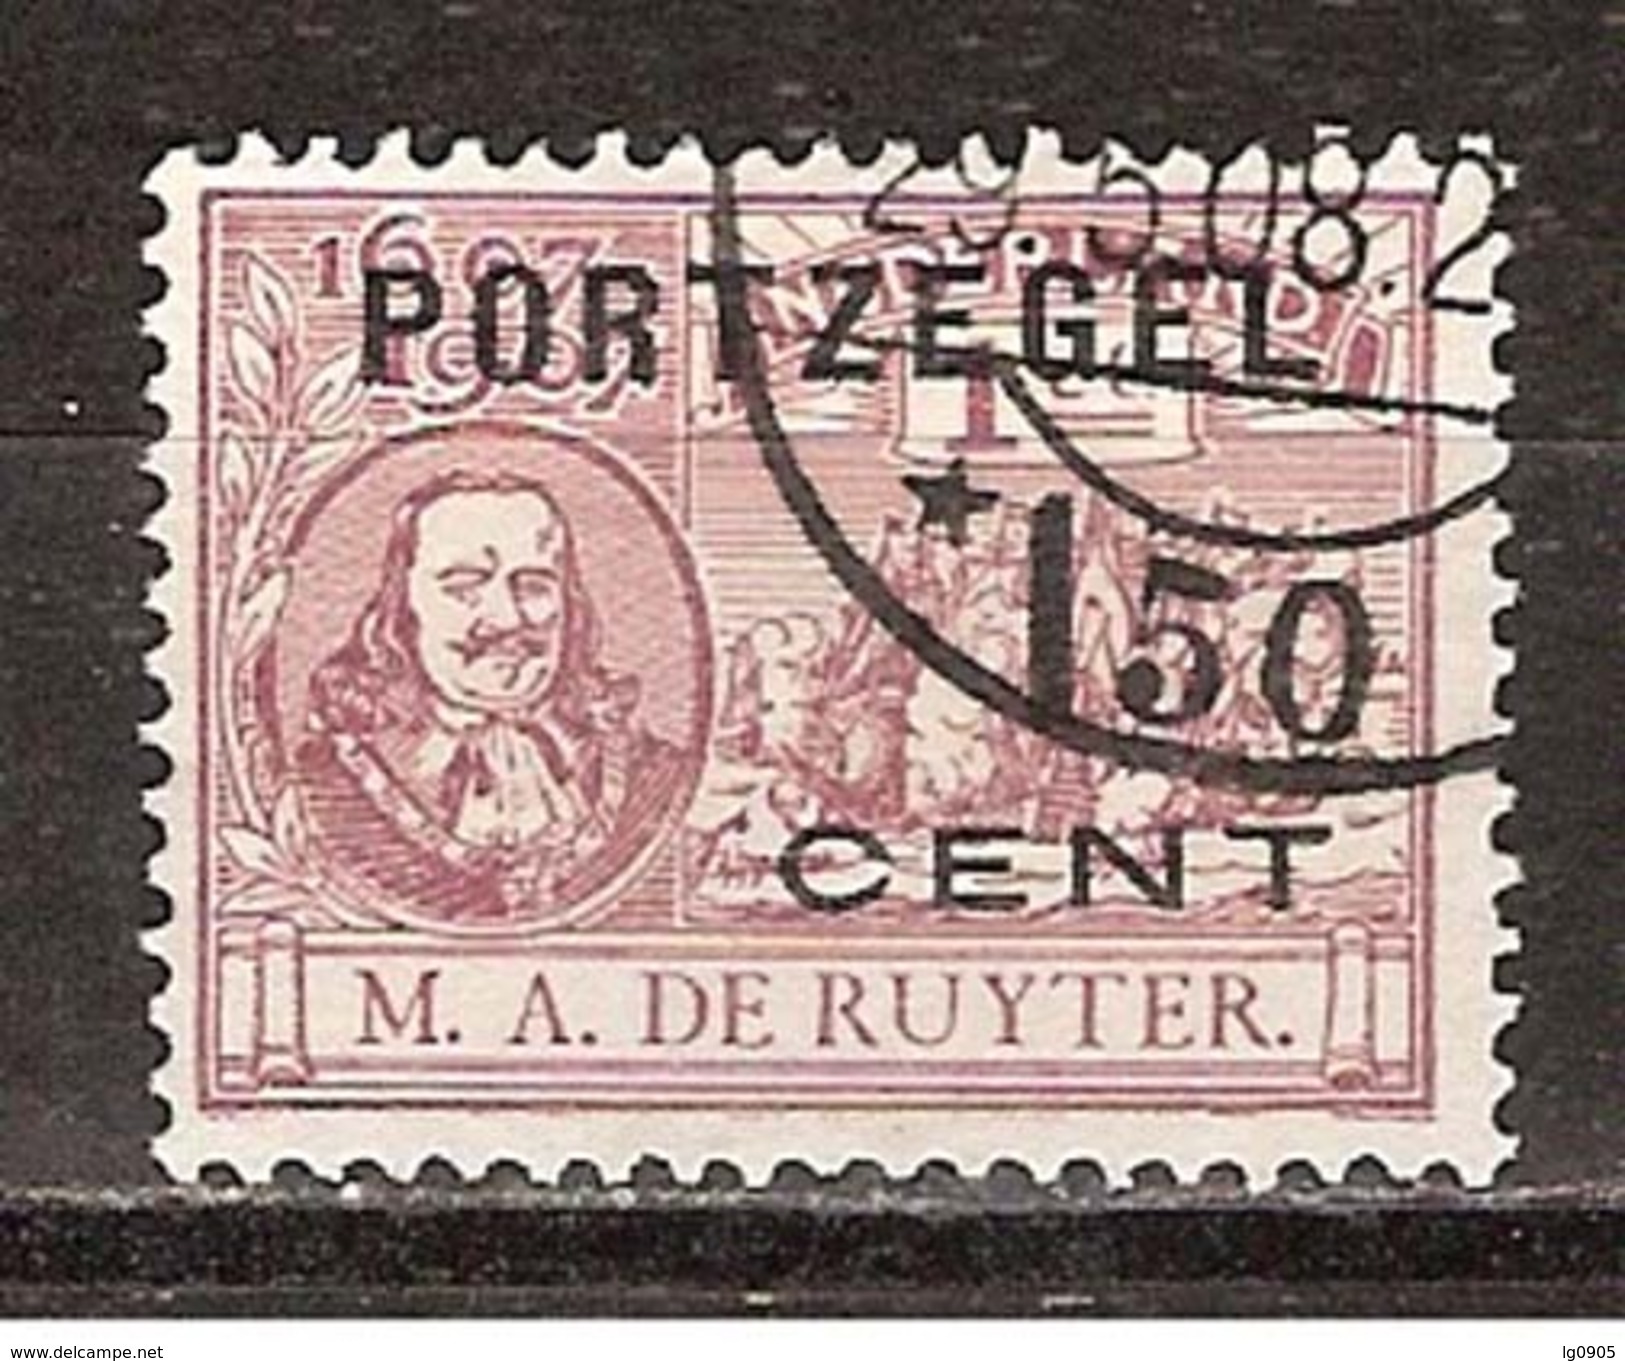 NVPH Nederland Netherlands Pays Bas Holanda 32 Used ; Port Timbre-taxe Postmarke Sellos De Correos NOW MANY DUE STAMPS - Strafportzegels